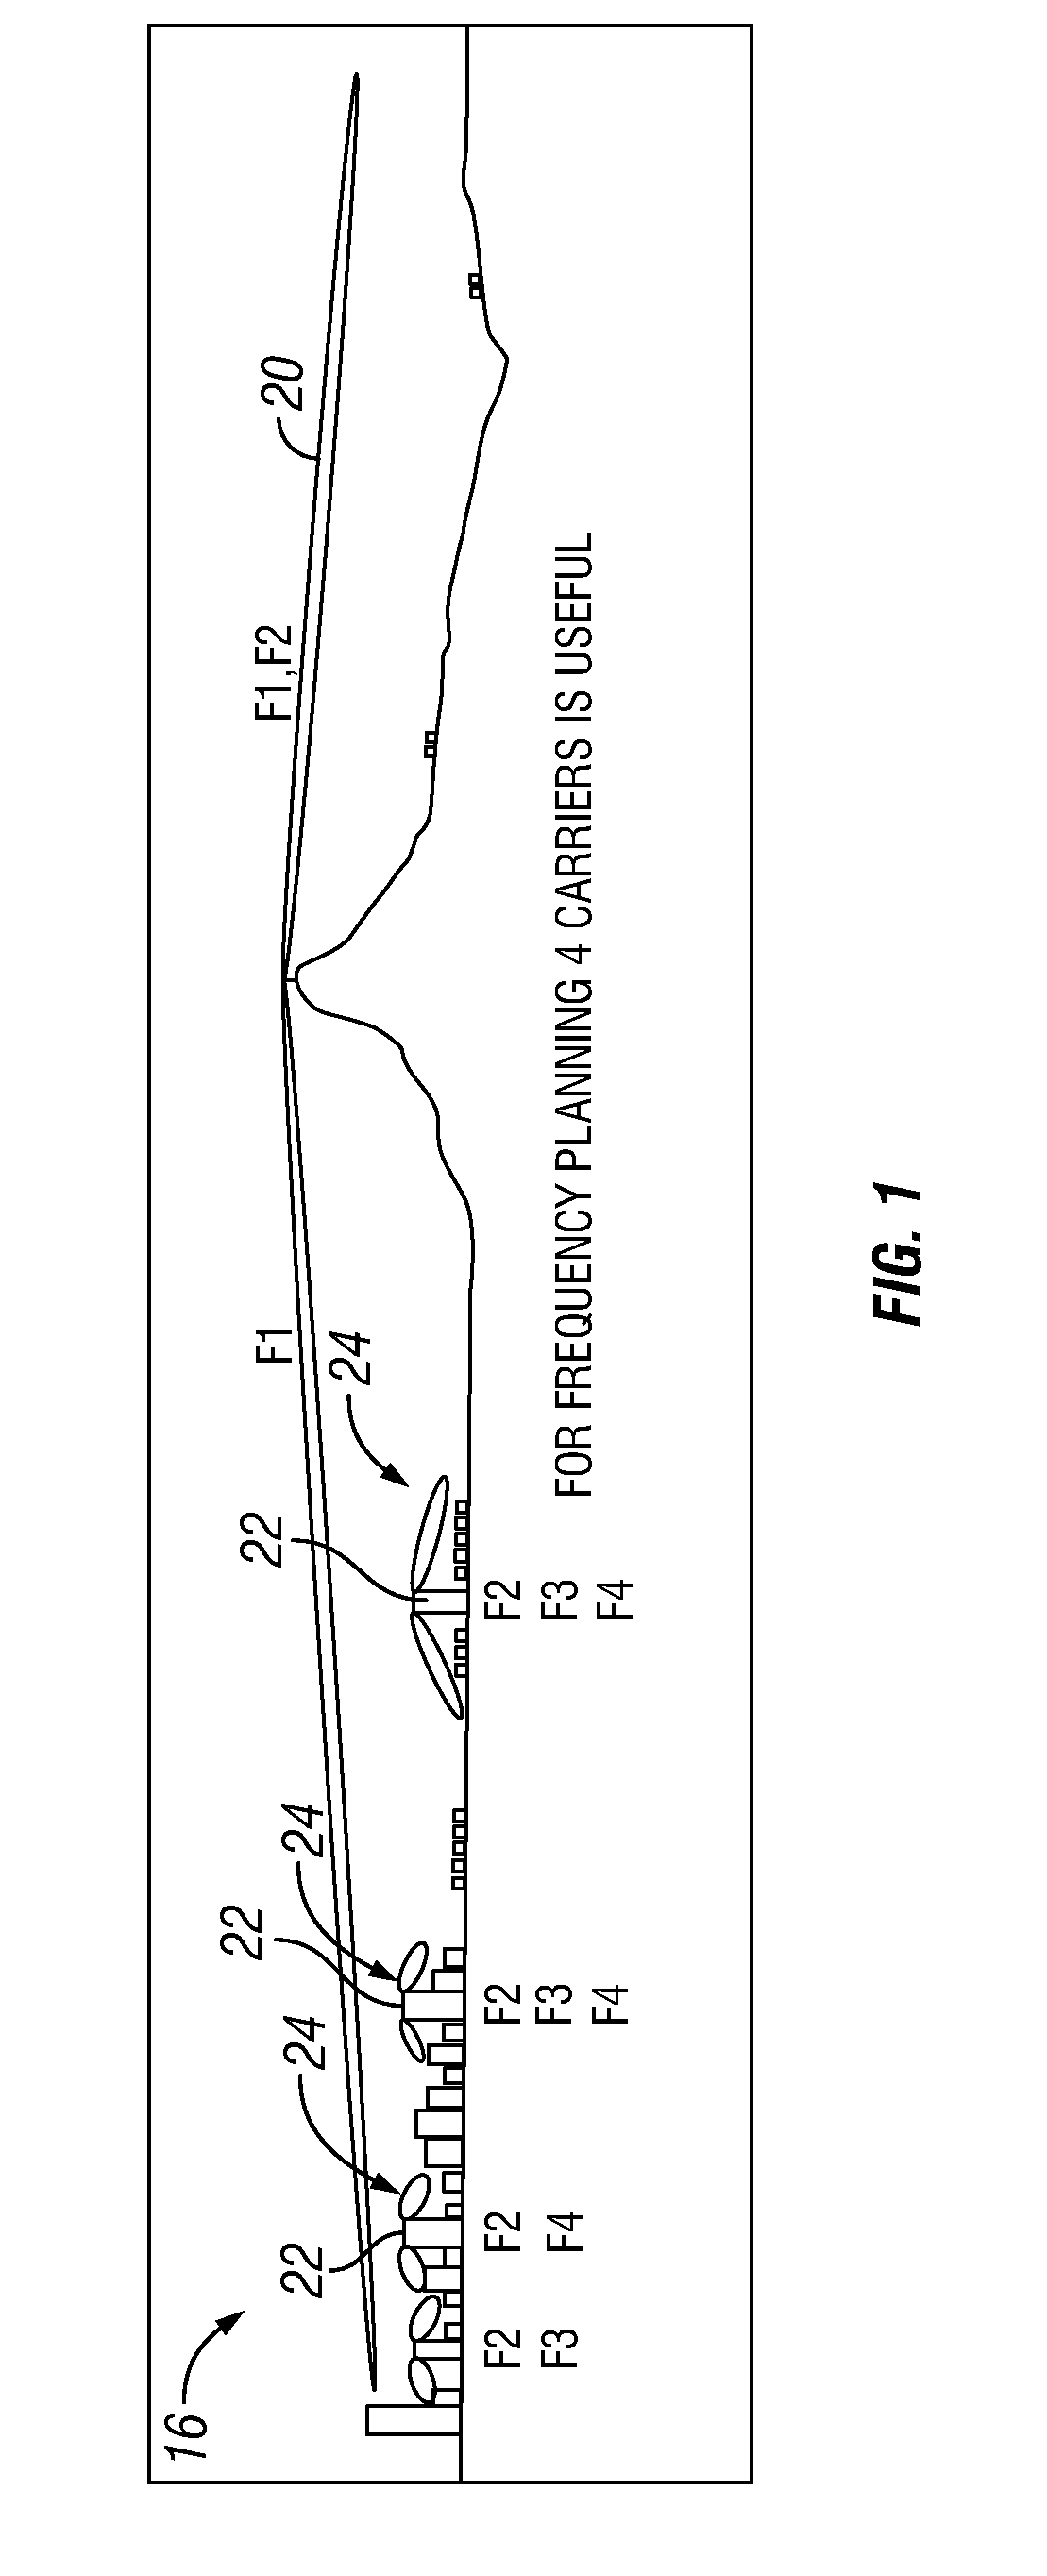 Method and Controller for Redirection of Active Users From an Umbrella Cell to Capacity Cells